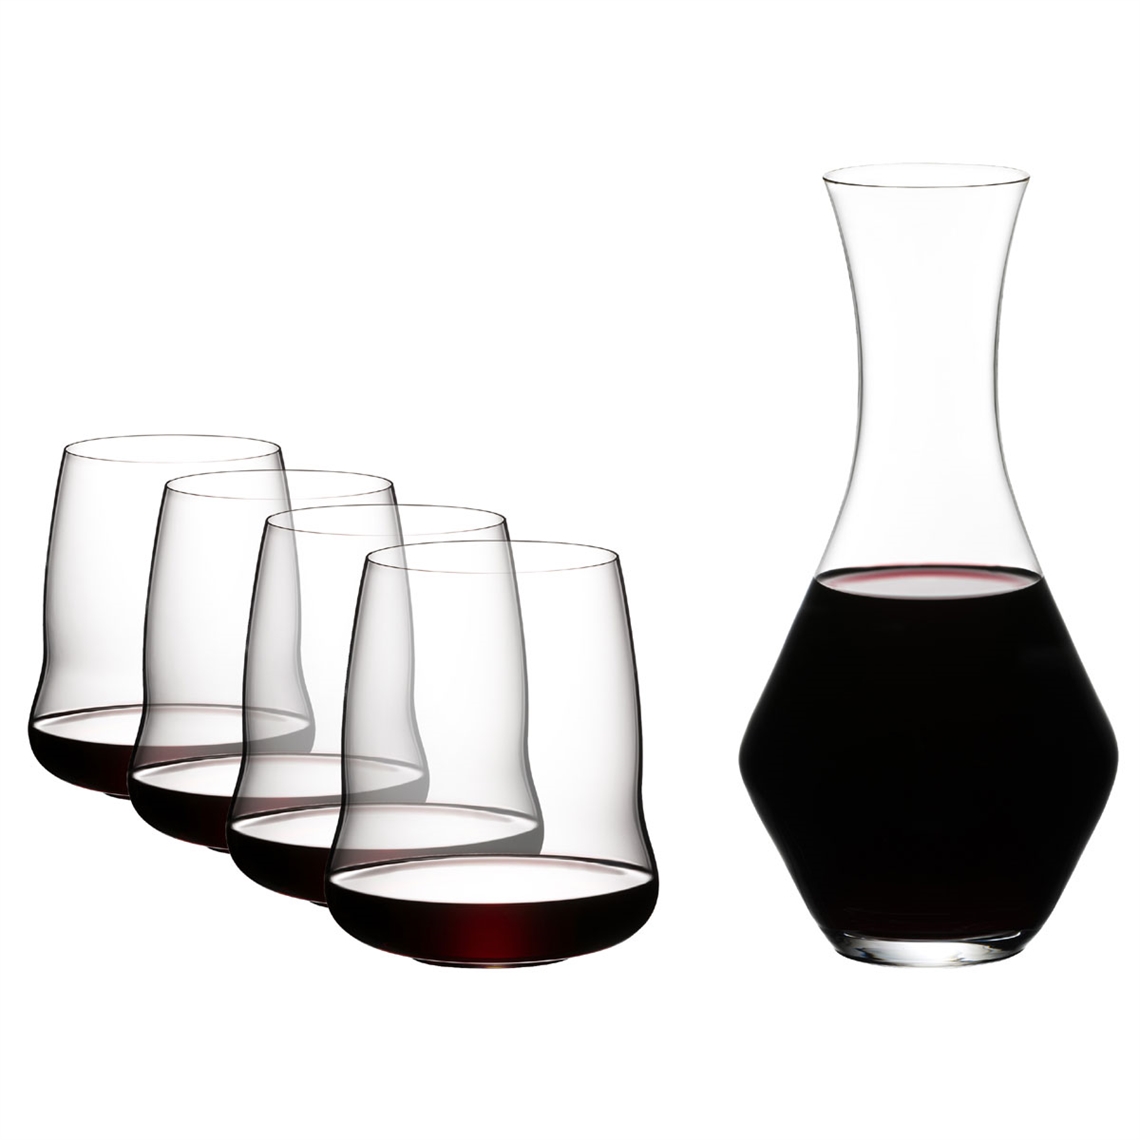 Riedel Stemless Wings Cabernet Sauvignon Glasses x4 + Decanter Gift Set - 5789/30